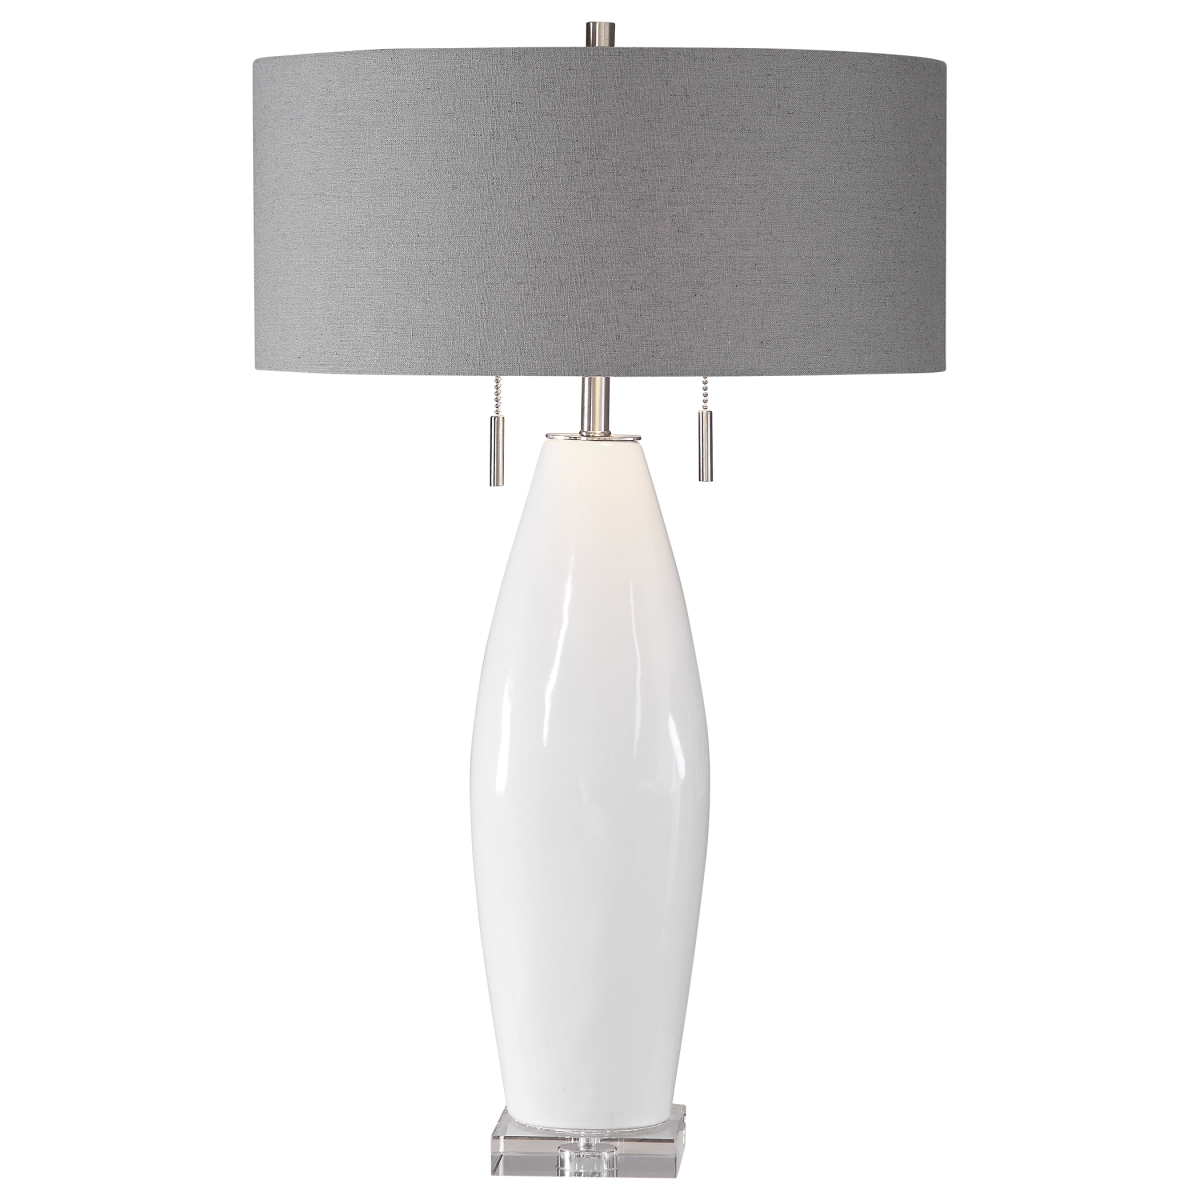 Picture of 212 Main 26409 Laurie White Ceramic Table Lamp